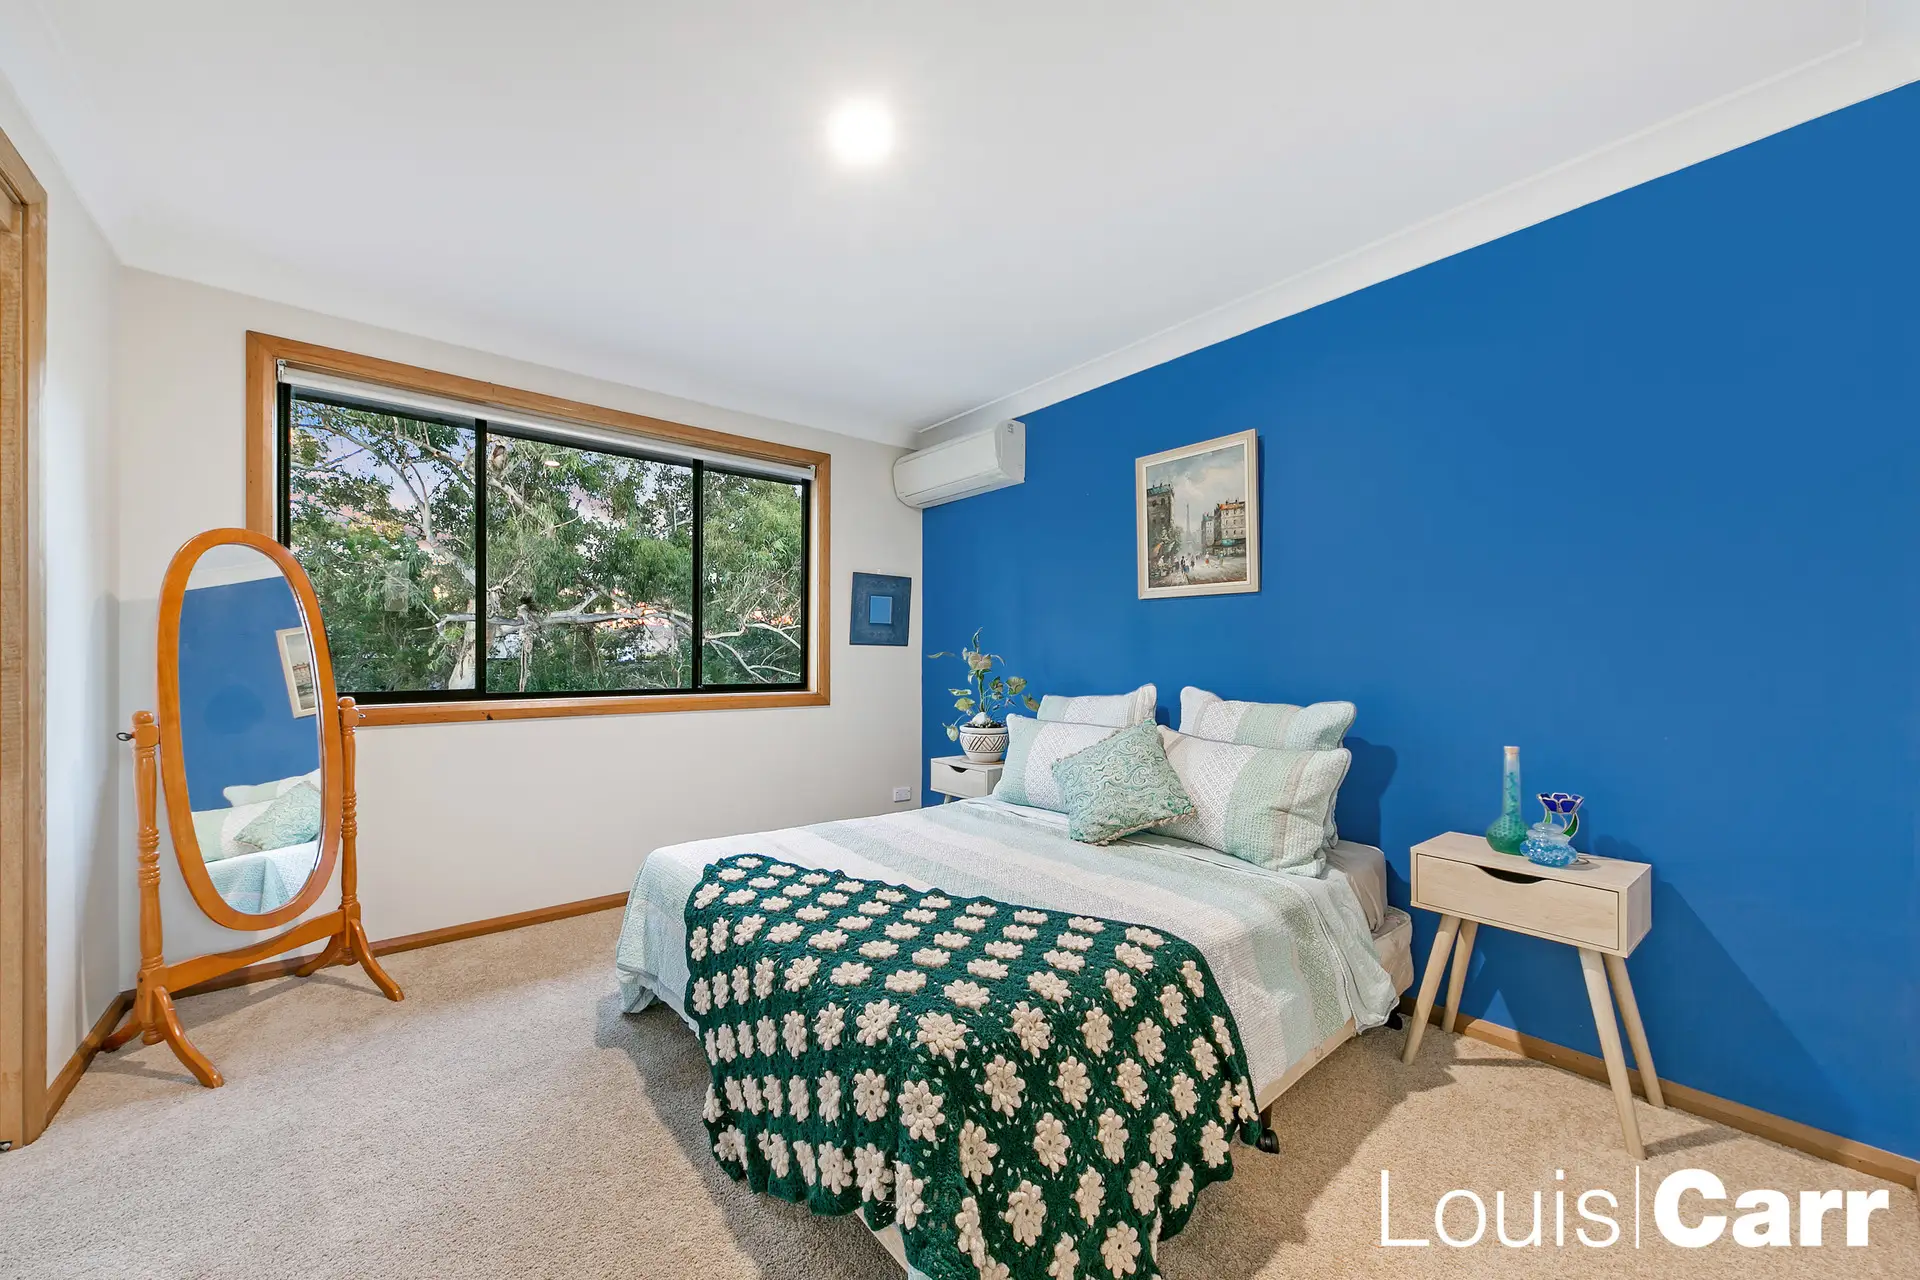 Photo #13: 13 Cairngorm Avenue, Glenhaven - Sold by Louis Carr Real Estate